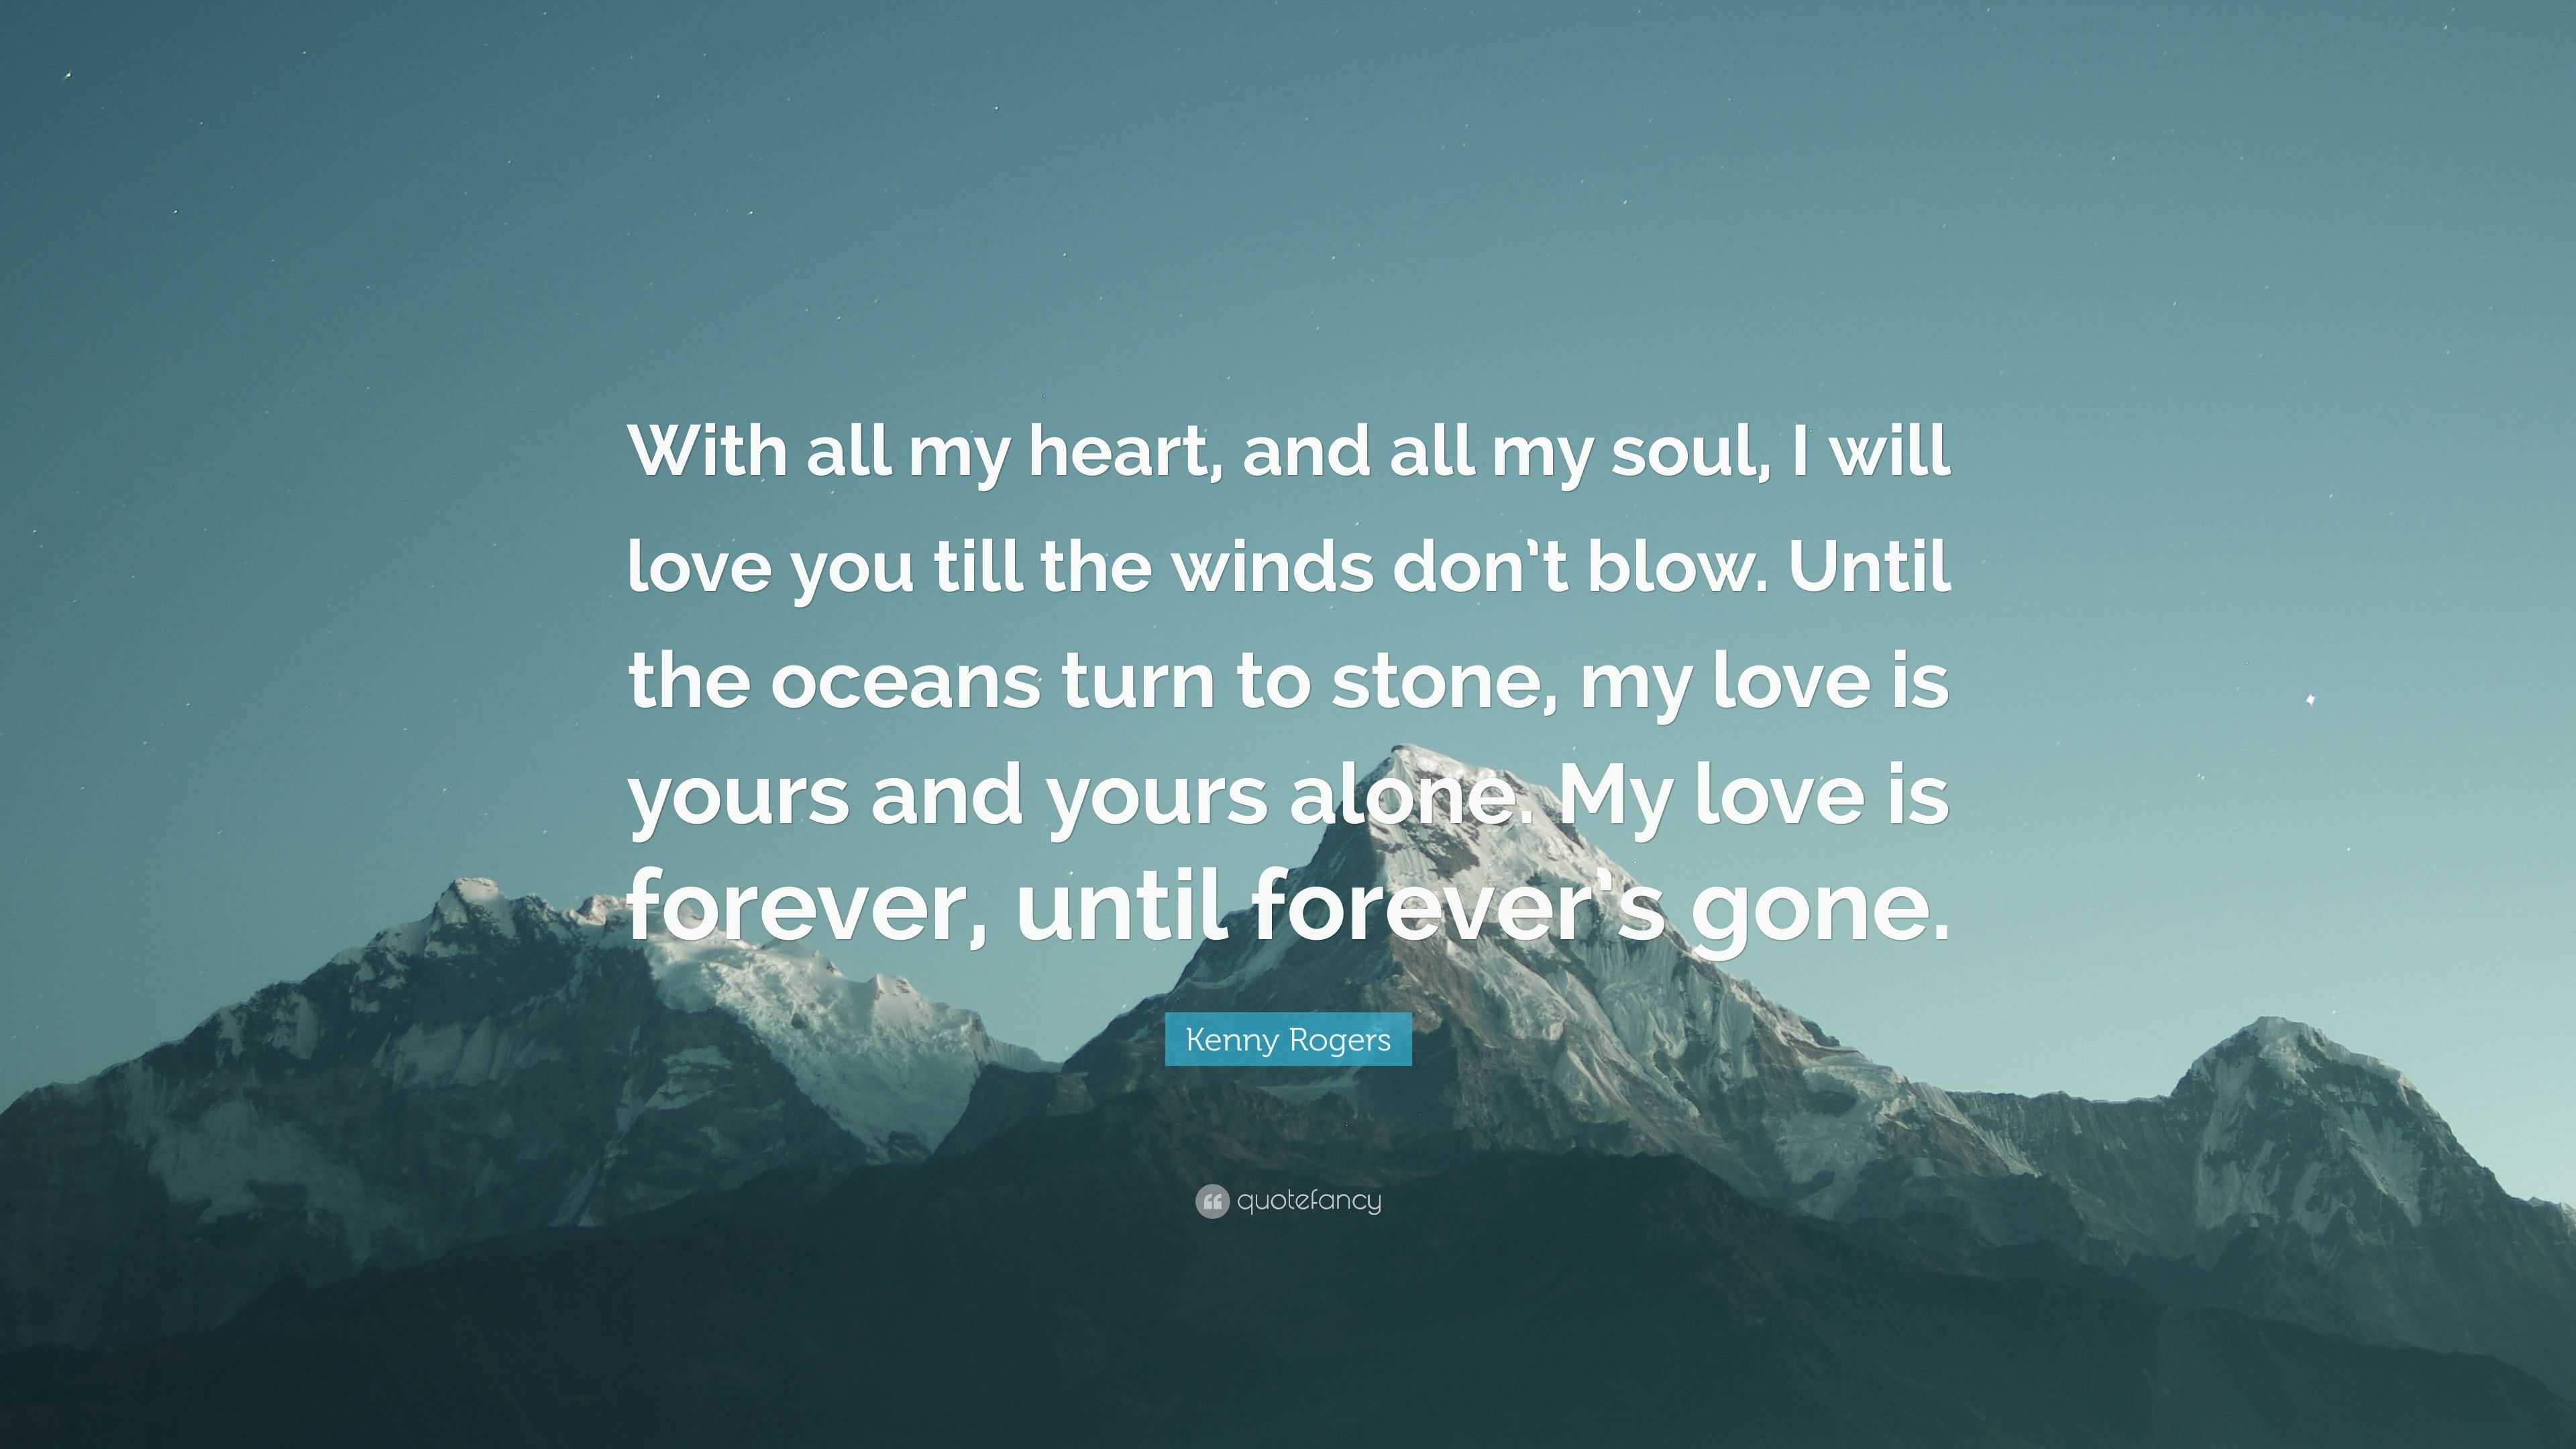 Kenny Rogers Quote: “With All My Heart, And All My Soul, I Will Love You Till The Winds Don't Blow. Until The Oceans Turn To Stone, My Love I...”